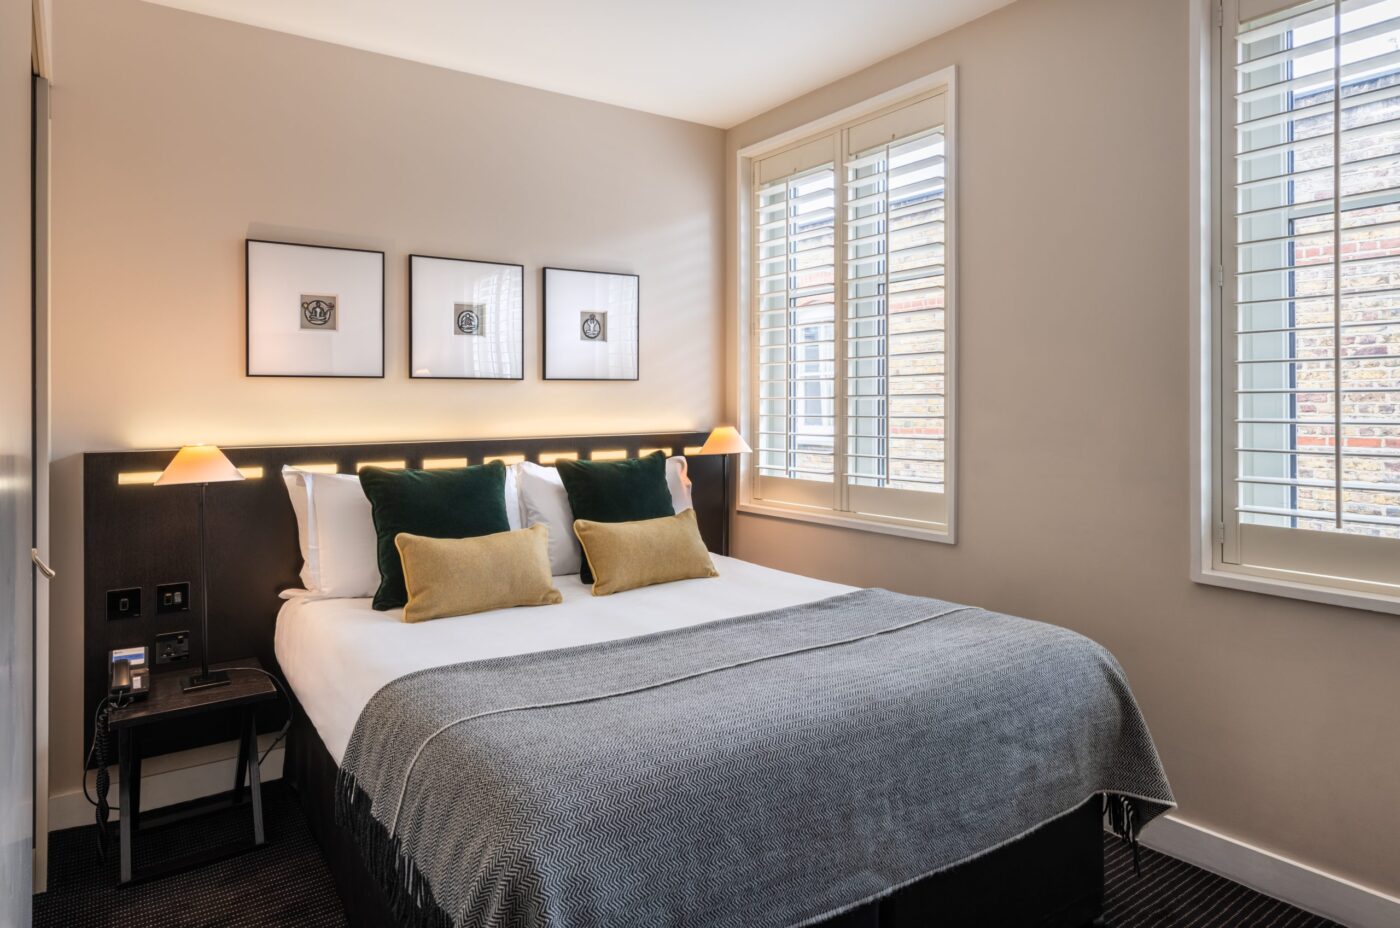 A double room, with bedside tables, located in Soho.